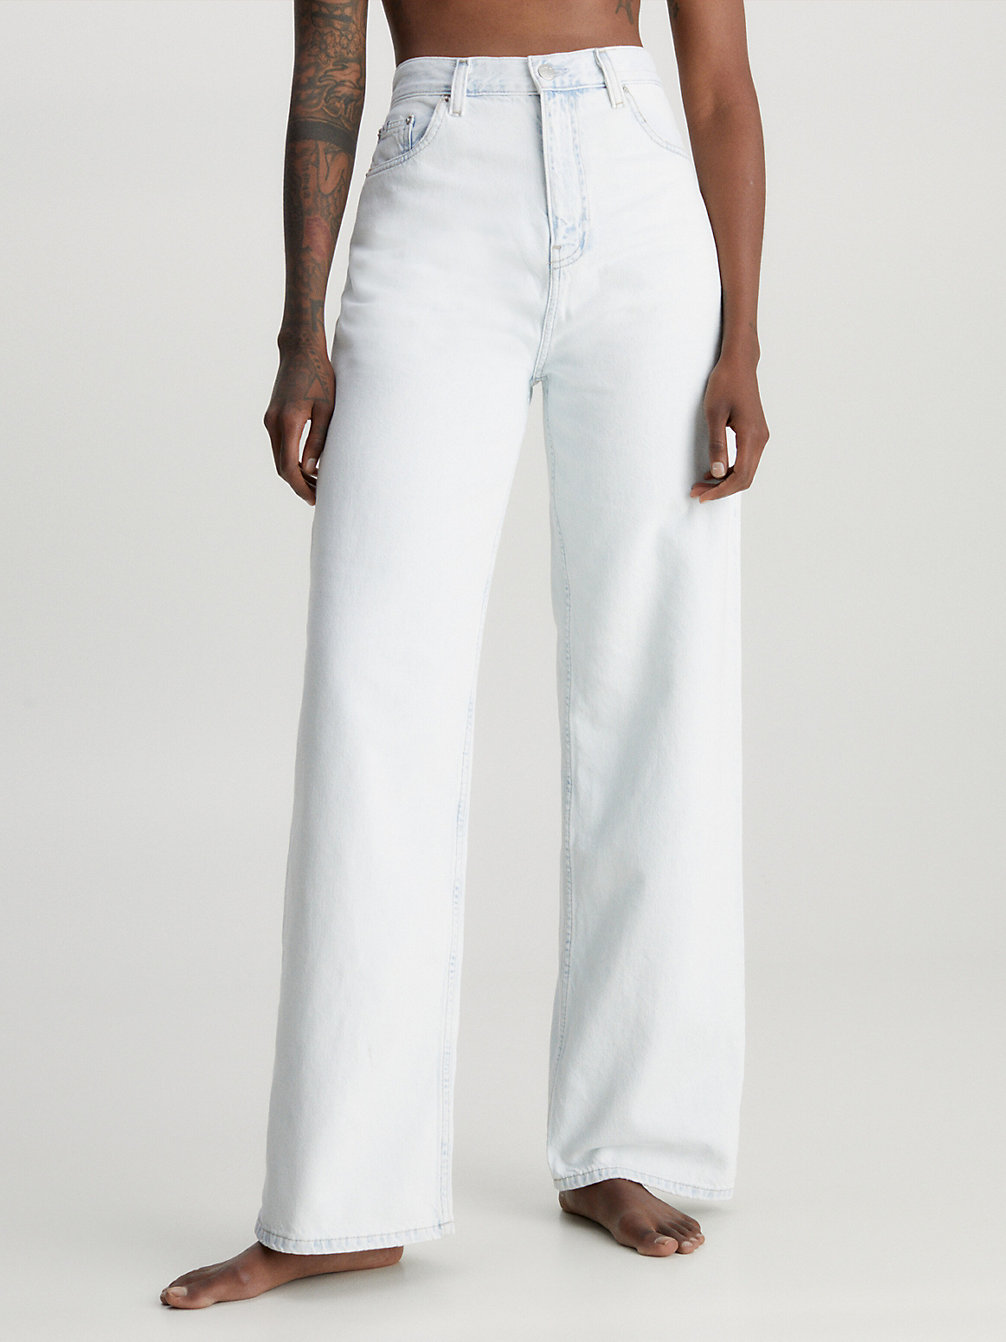 High Rise Relaxed Jeans > DENIM LIGHT > undefined mujeres > Calvin Klein